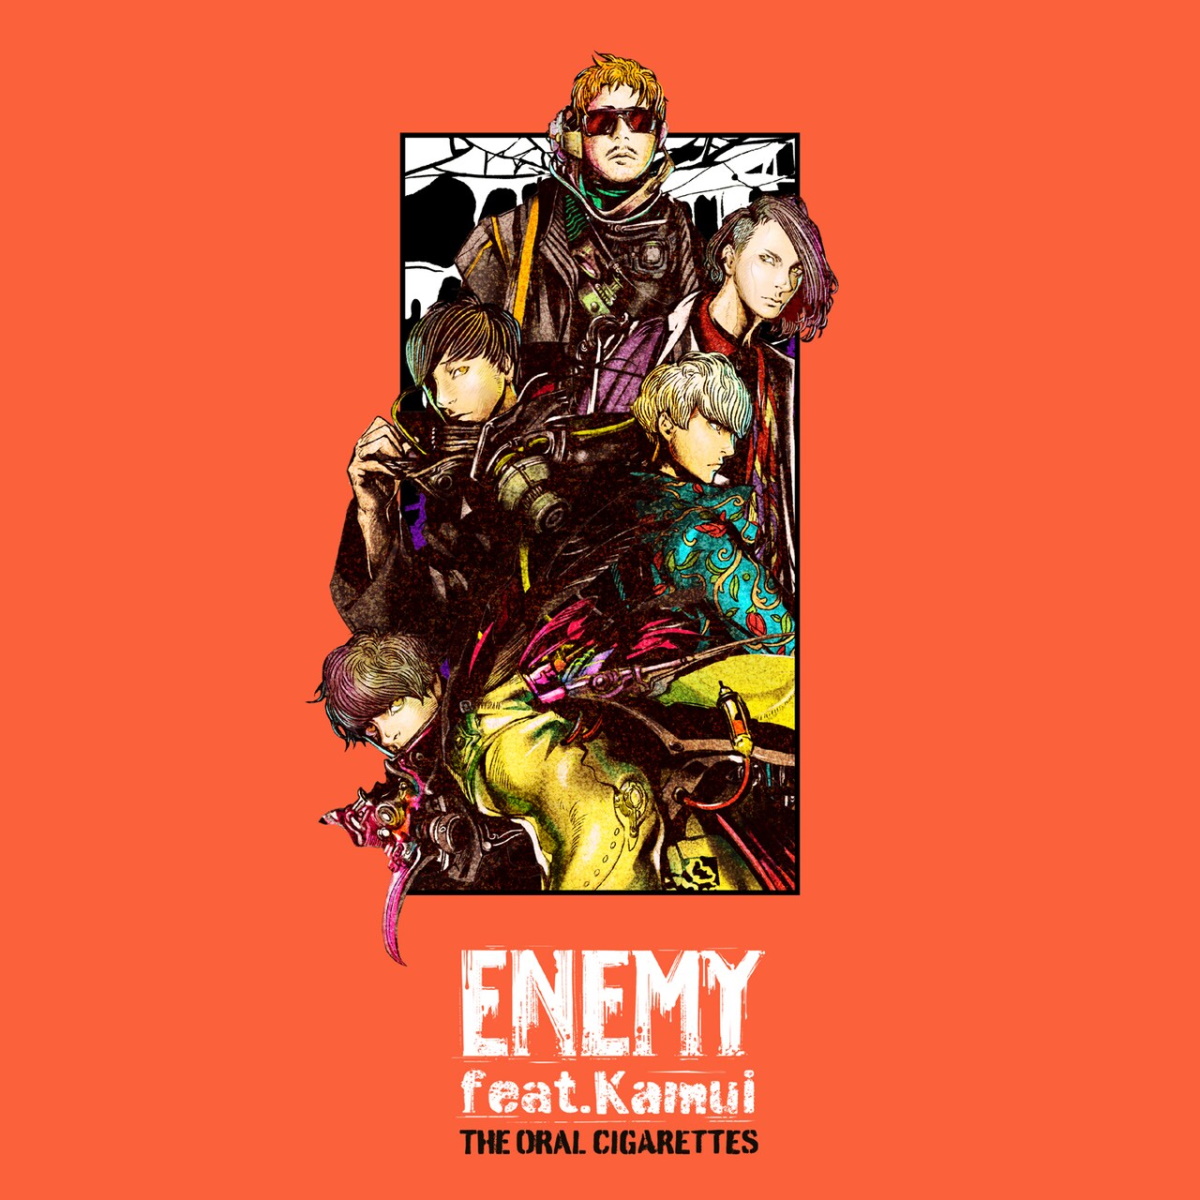 『THE ORAL CIGARETTES - ENEMY feat.Kamui』収録の『ENEMY feat.Kamui』ジャケット